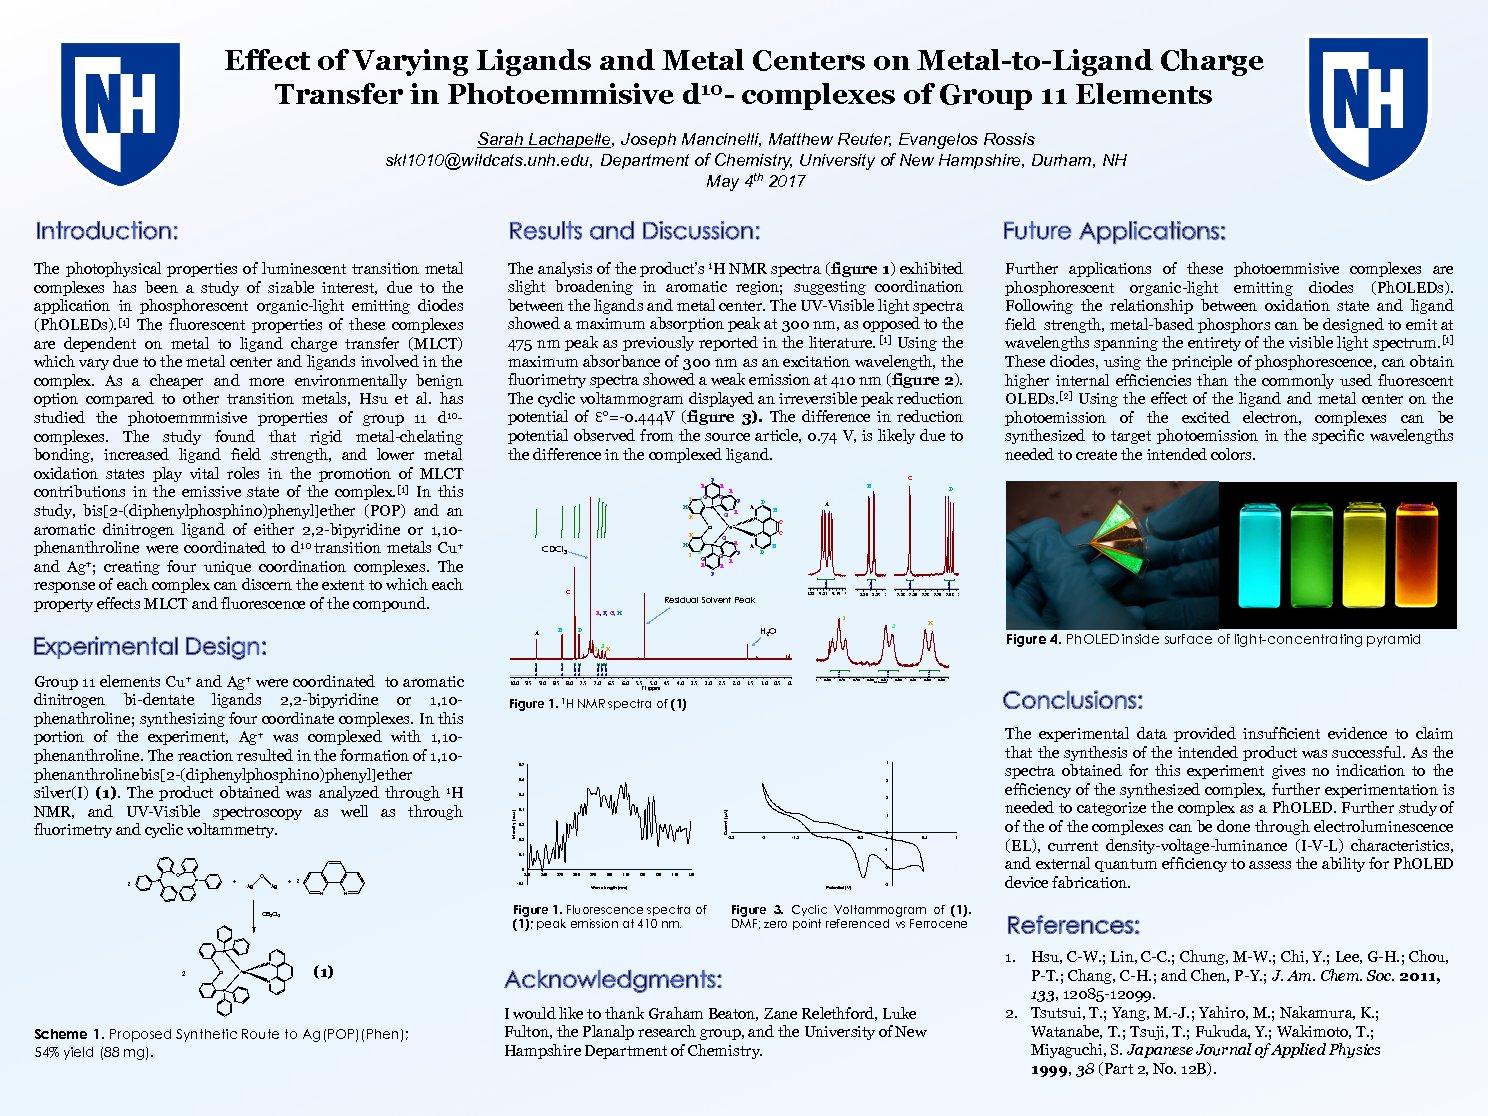 Effect Of Varying Ligands And Metal Centers On Metal-To-Ligand Charge Transfer In Photoemmisive D10- Complexes Of Group 11 Elements by skl1010